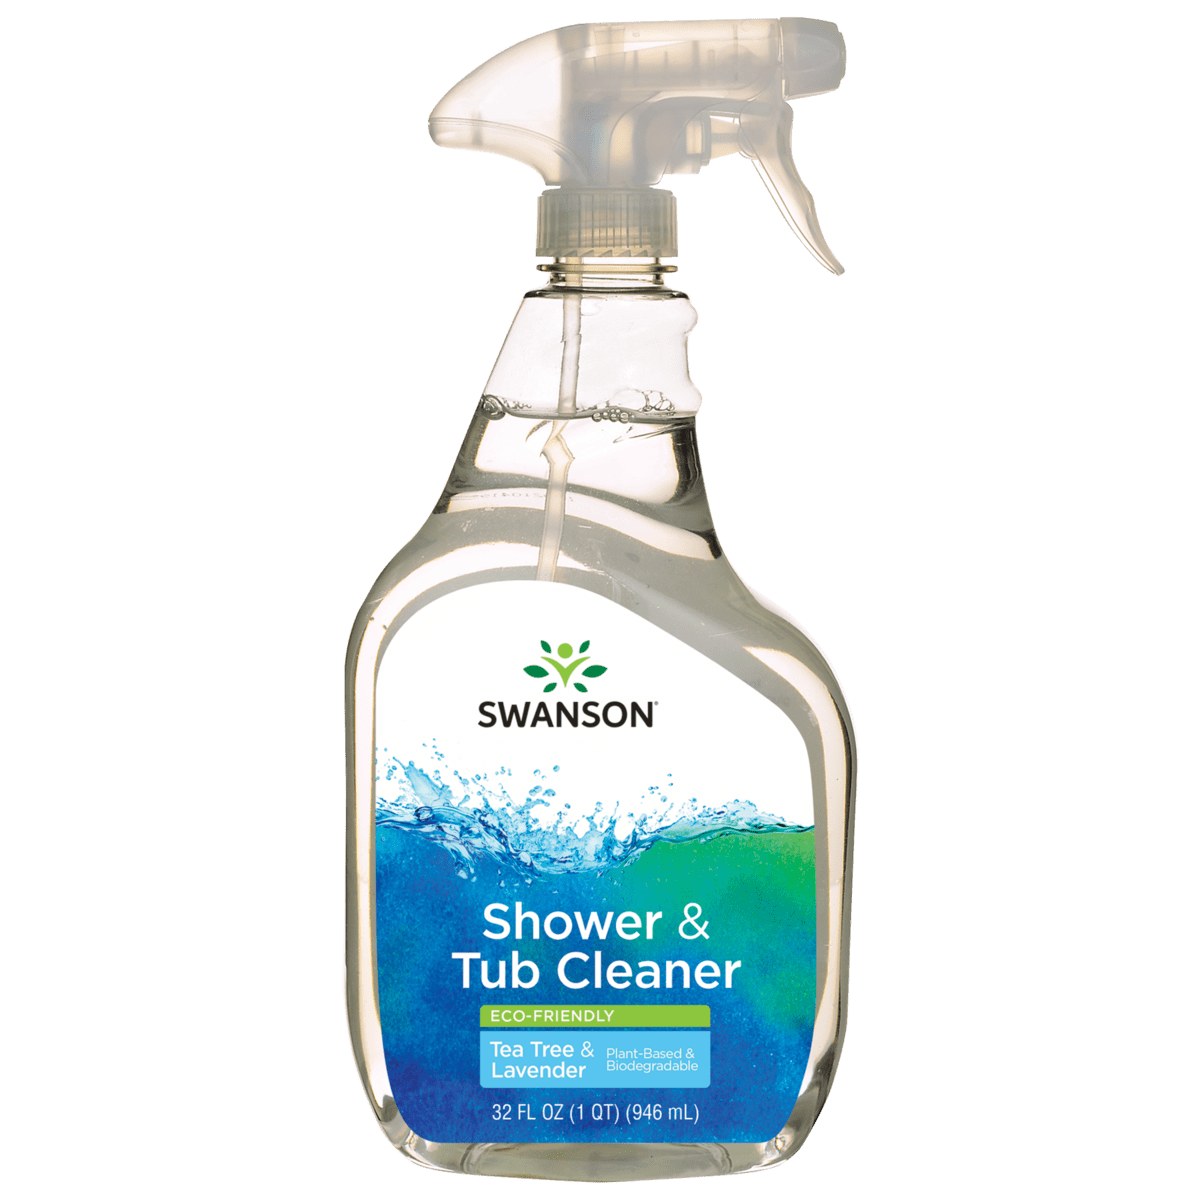 Eco-friendly Shower and Tub Cleaner - Tea Tree Lavender